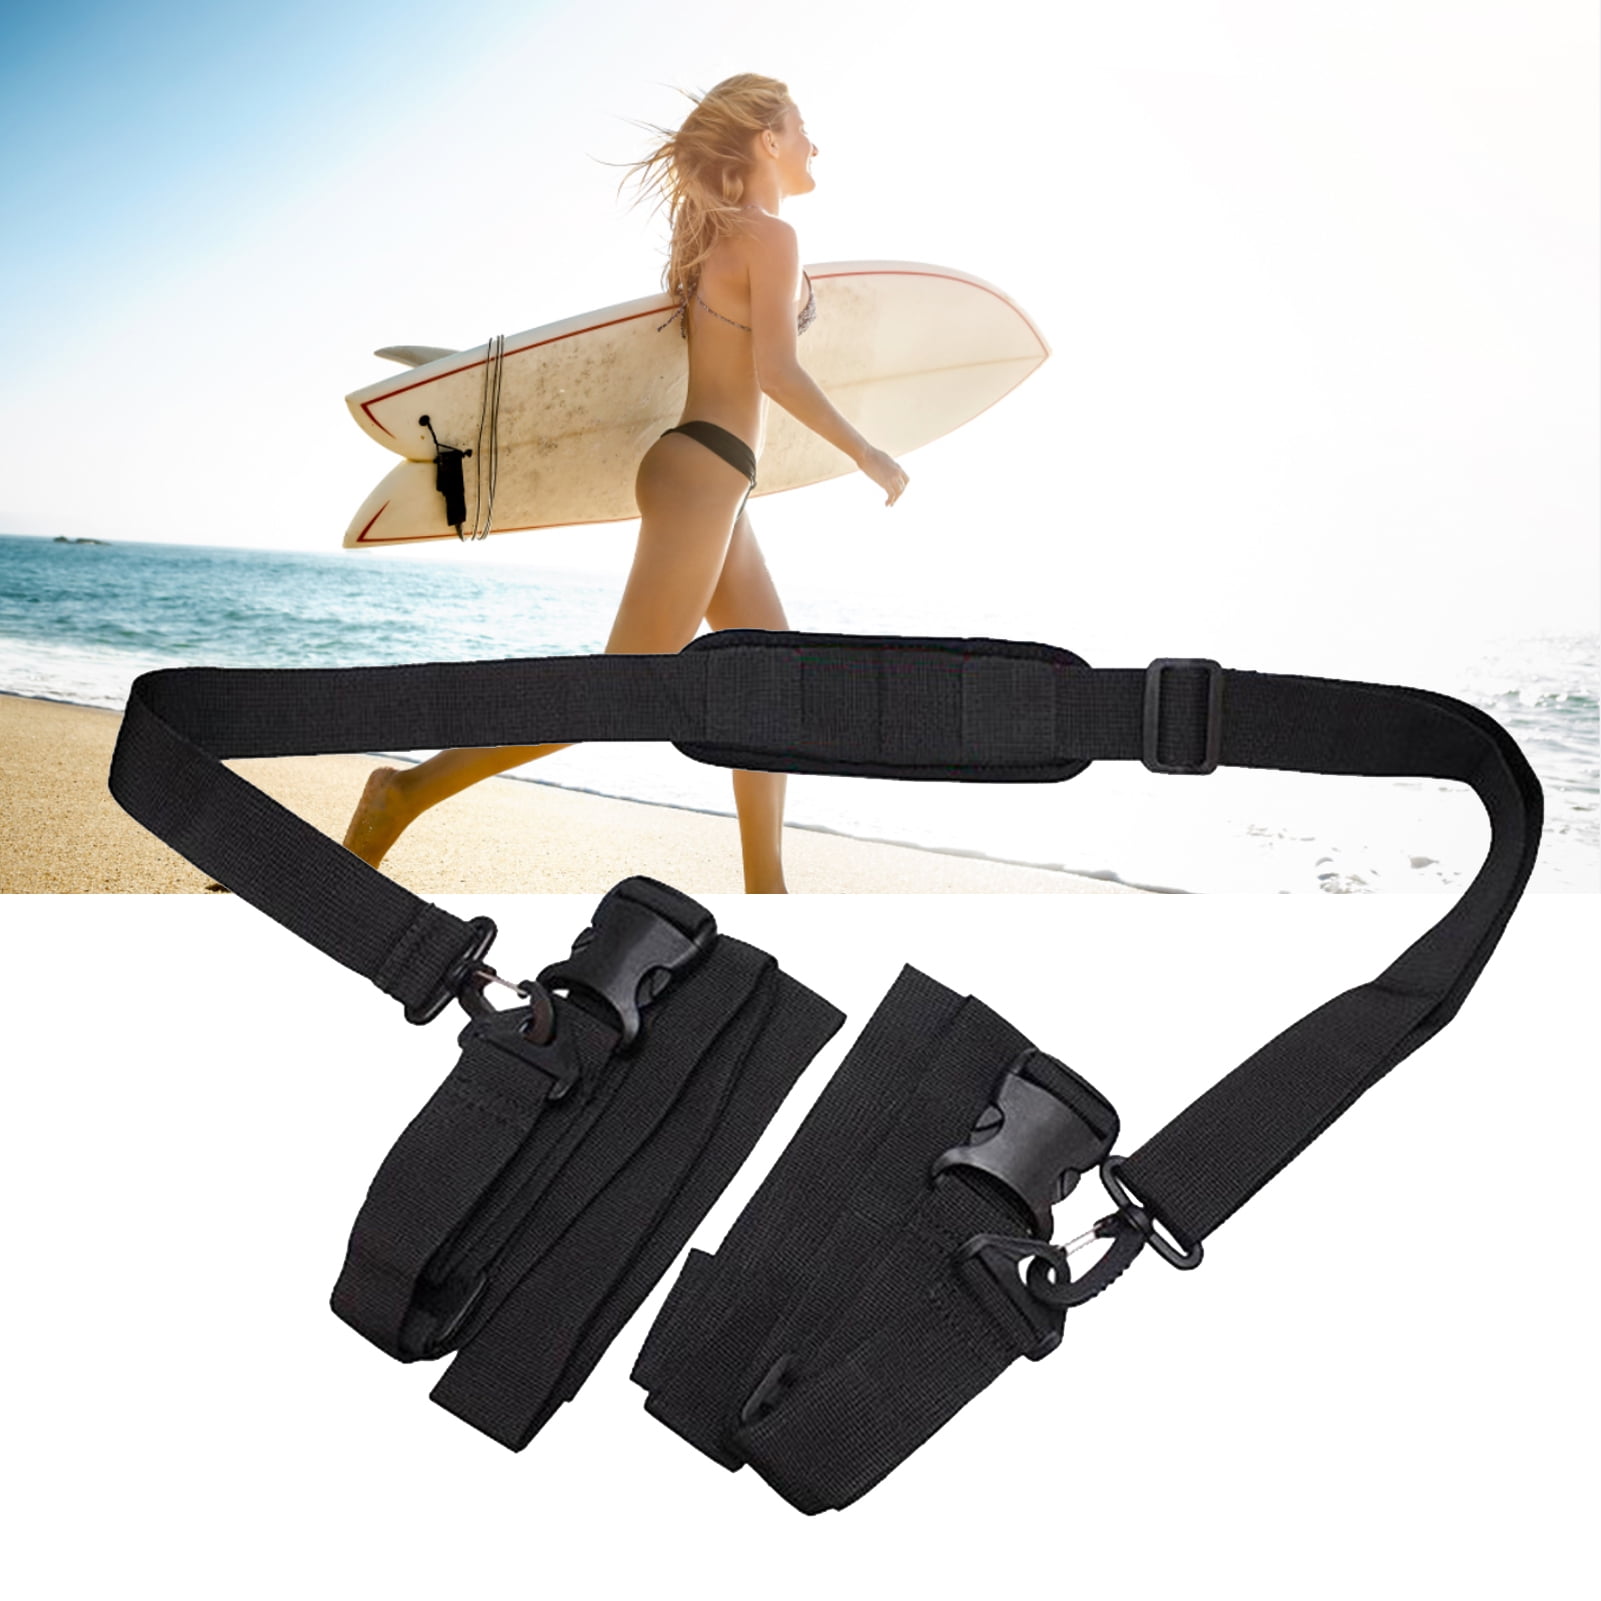 Surfboard Elastic TPU Ankle Rope Wrist Strap 10ft Coiled Kayak Paddle Board Leash SUP Strap for Boogie Board Long Board TOBWOLF 2PCS Surfboard Surfing Leashes with Adjustable Leg Cuff 